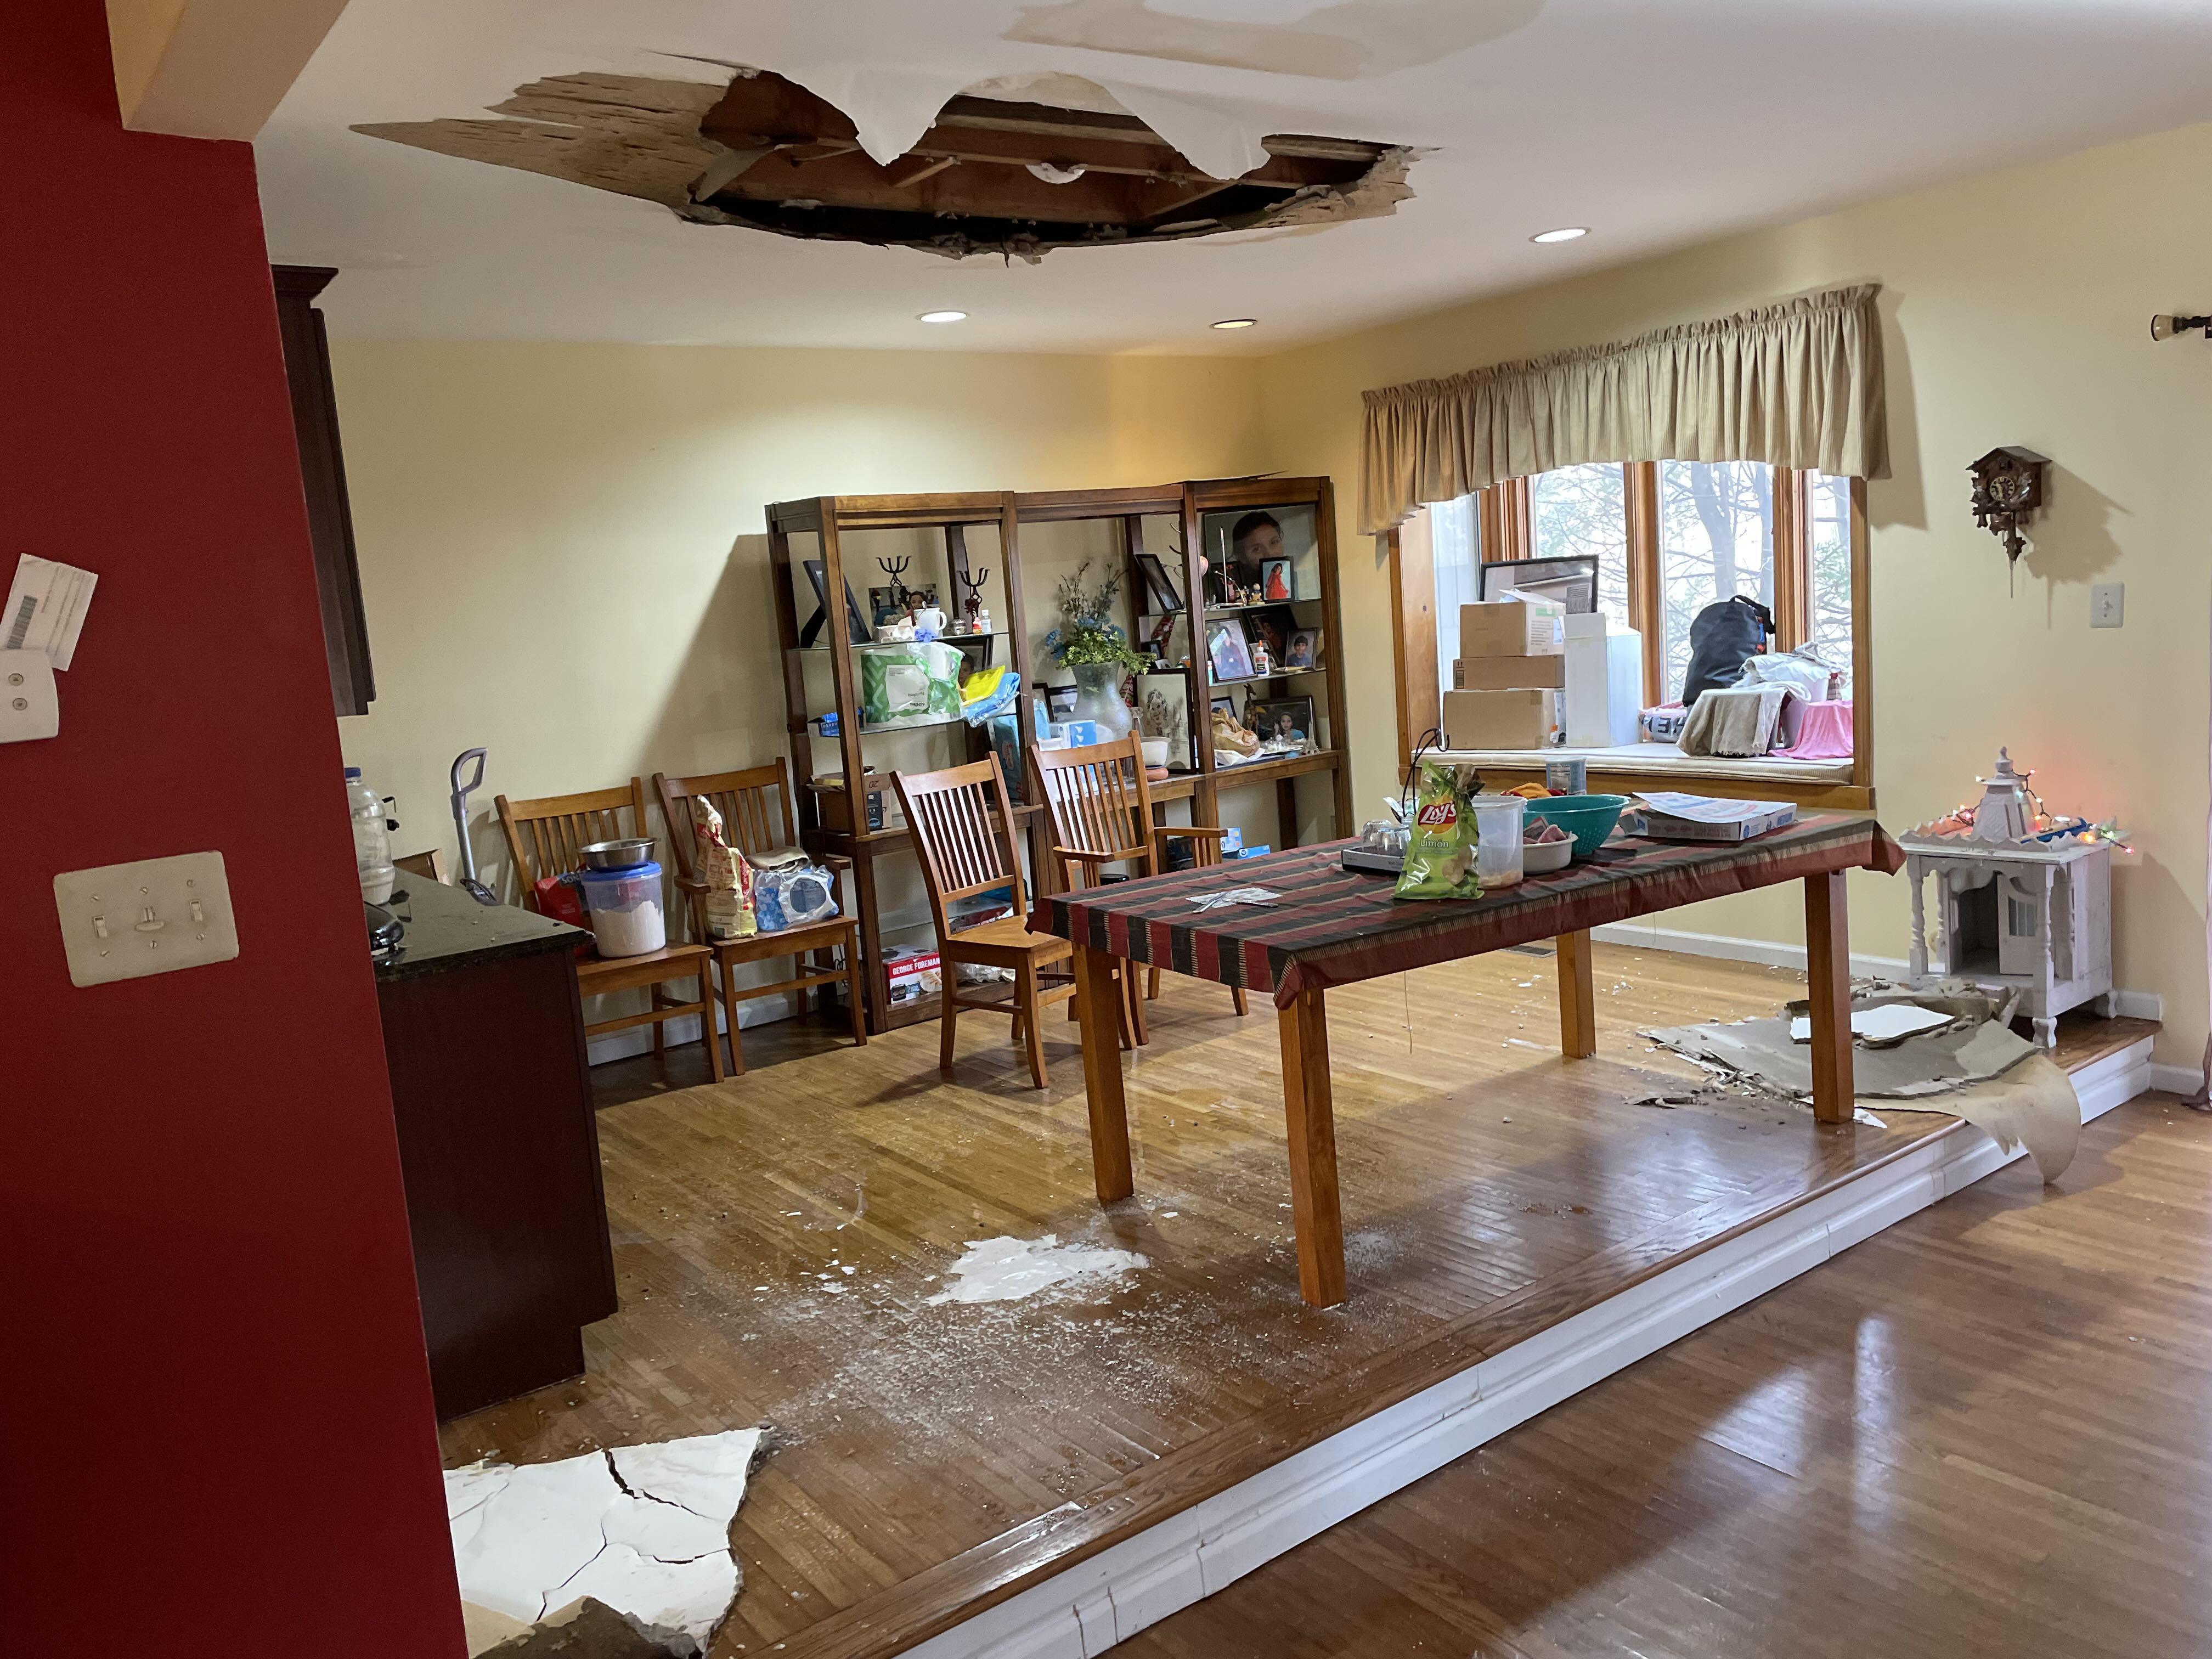 Living room ceiling damaged from overflowed toilet